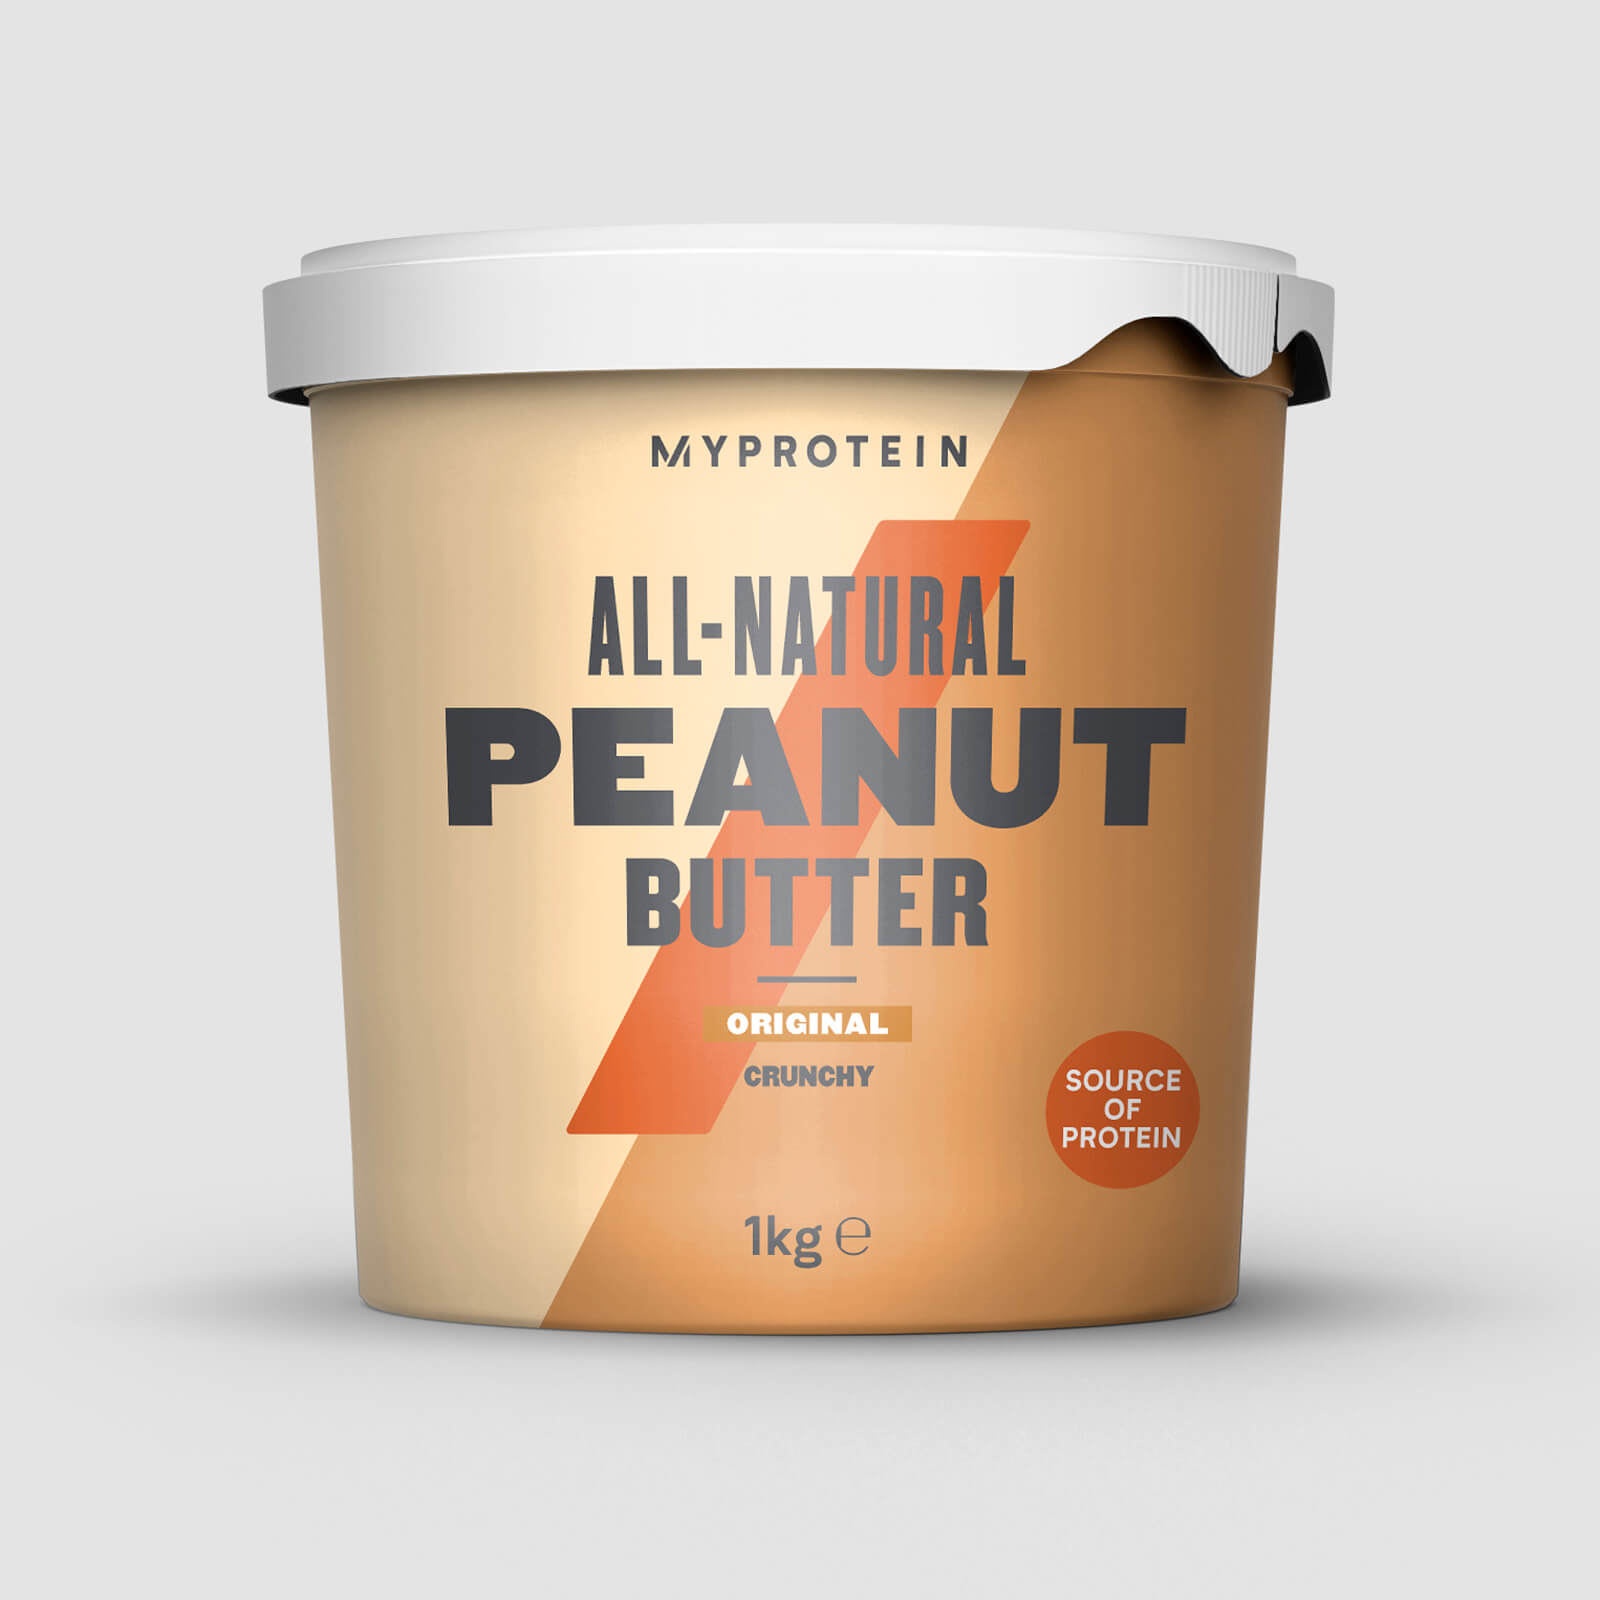 All-Natural Peanut Butter - Smooth